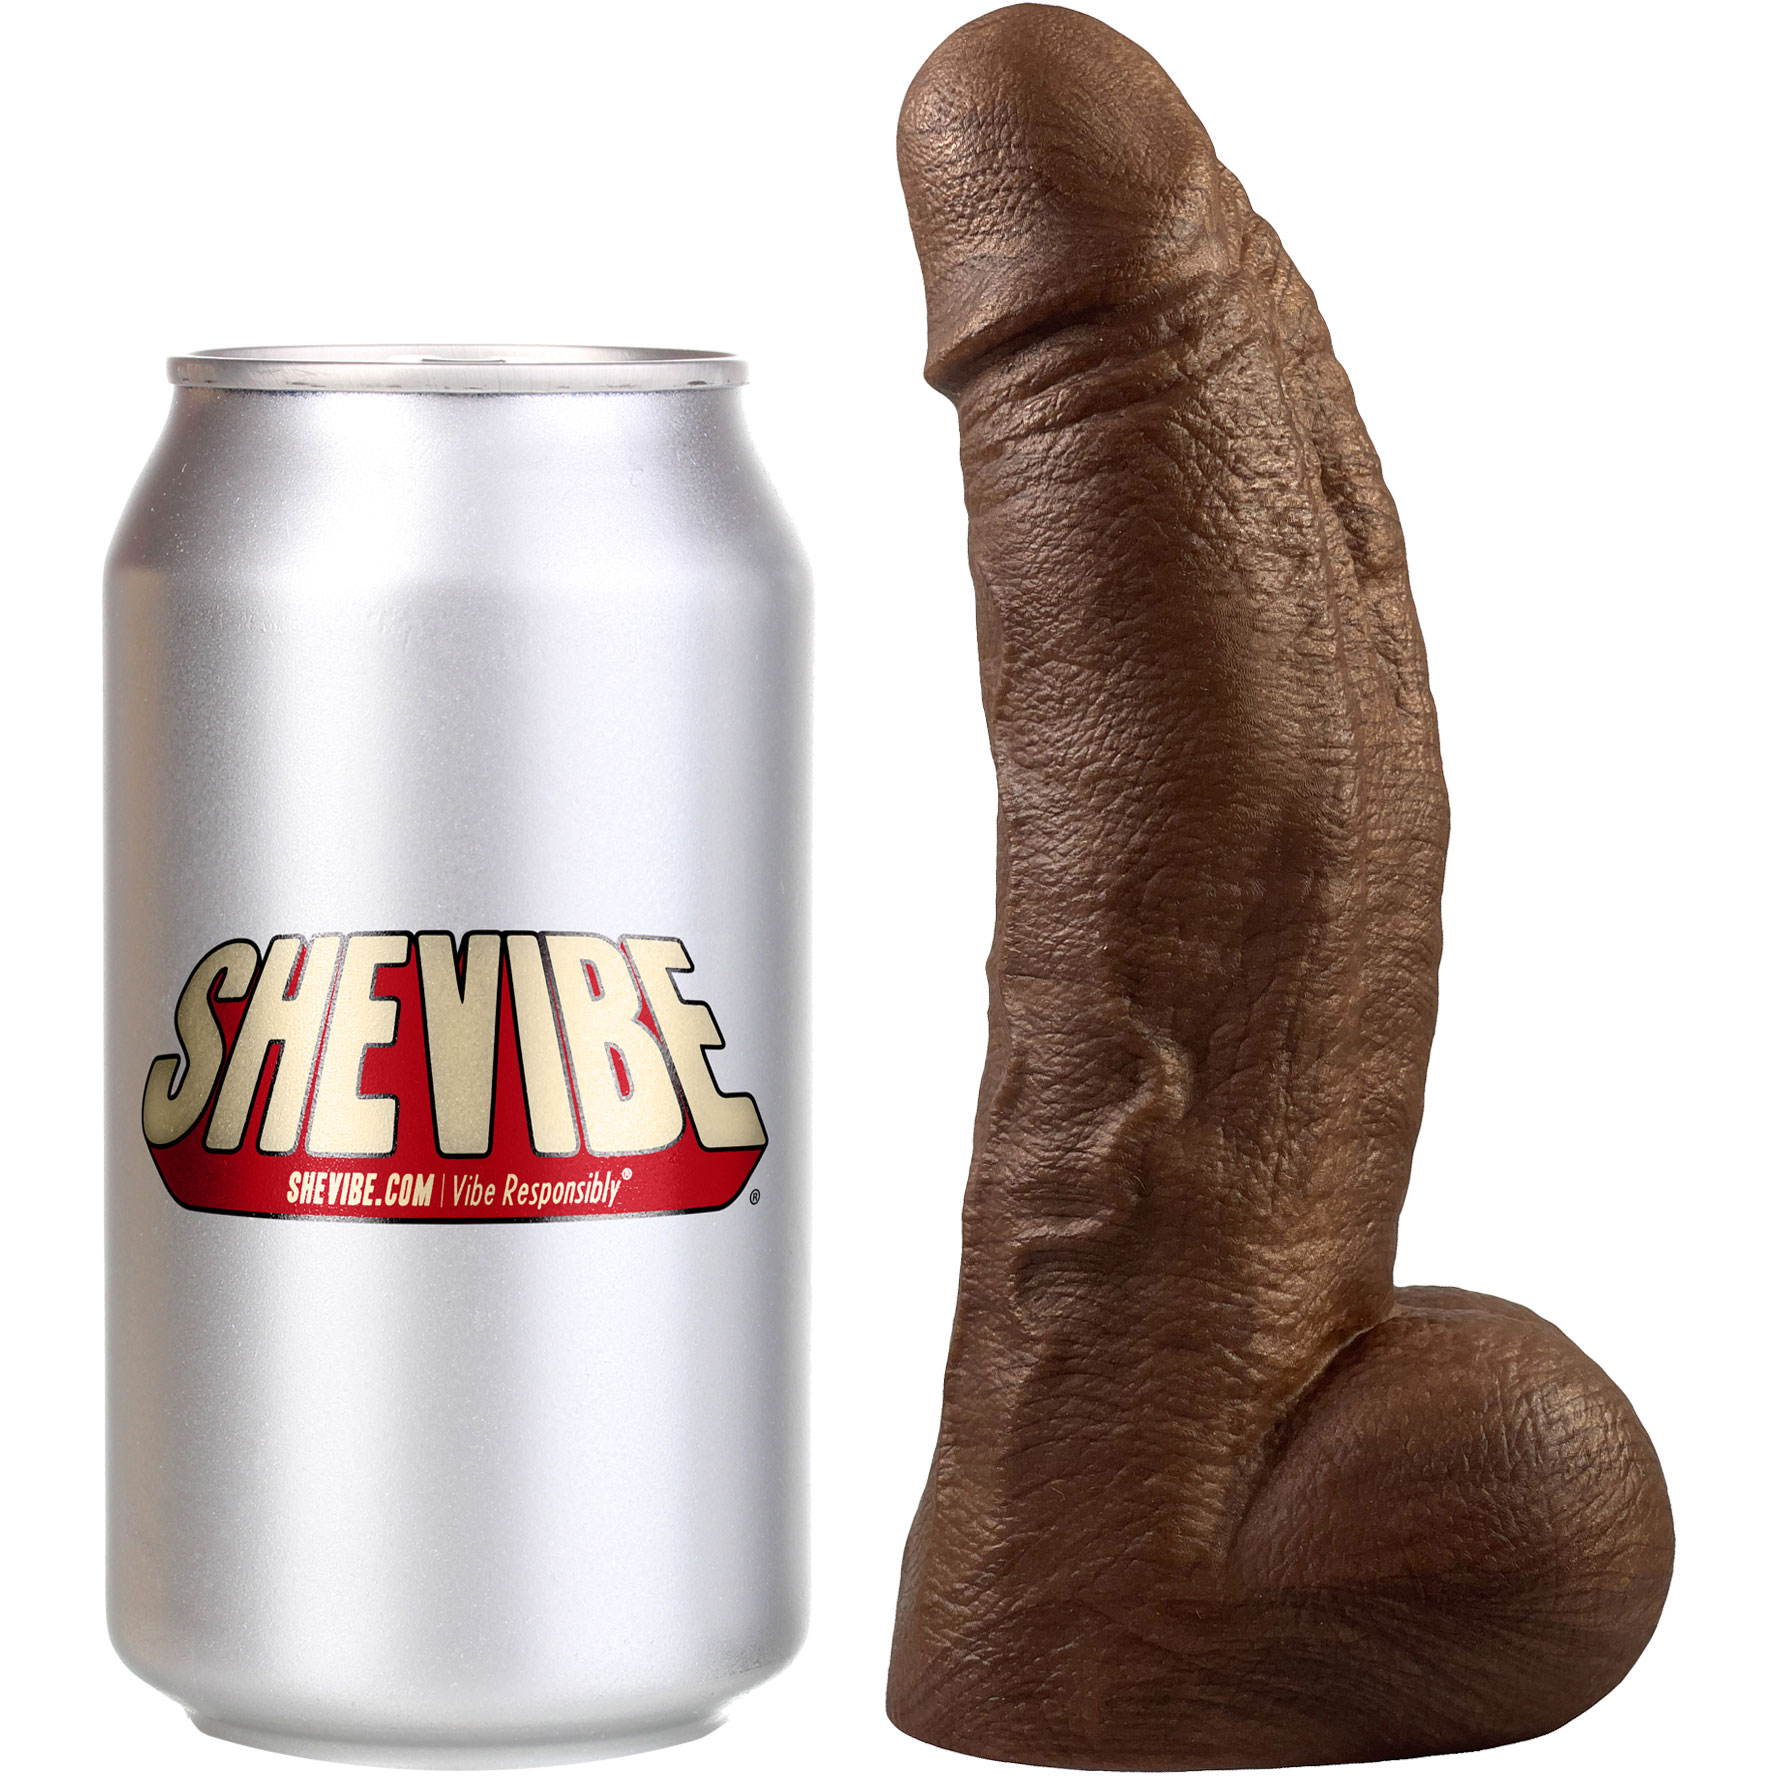 The Small Titan Platinum 6" Silicone Ultrarealistic Dildo With Soda Can For Reference